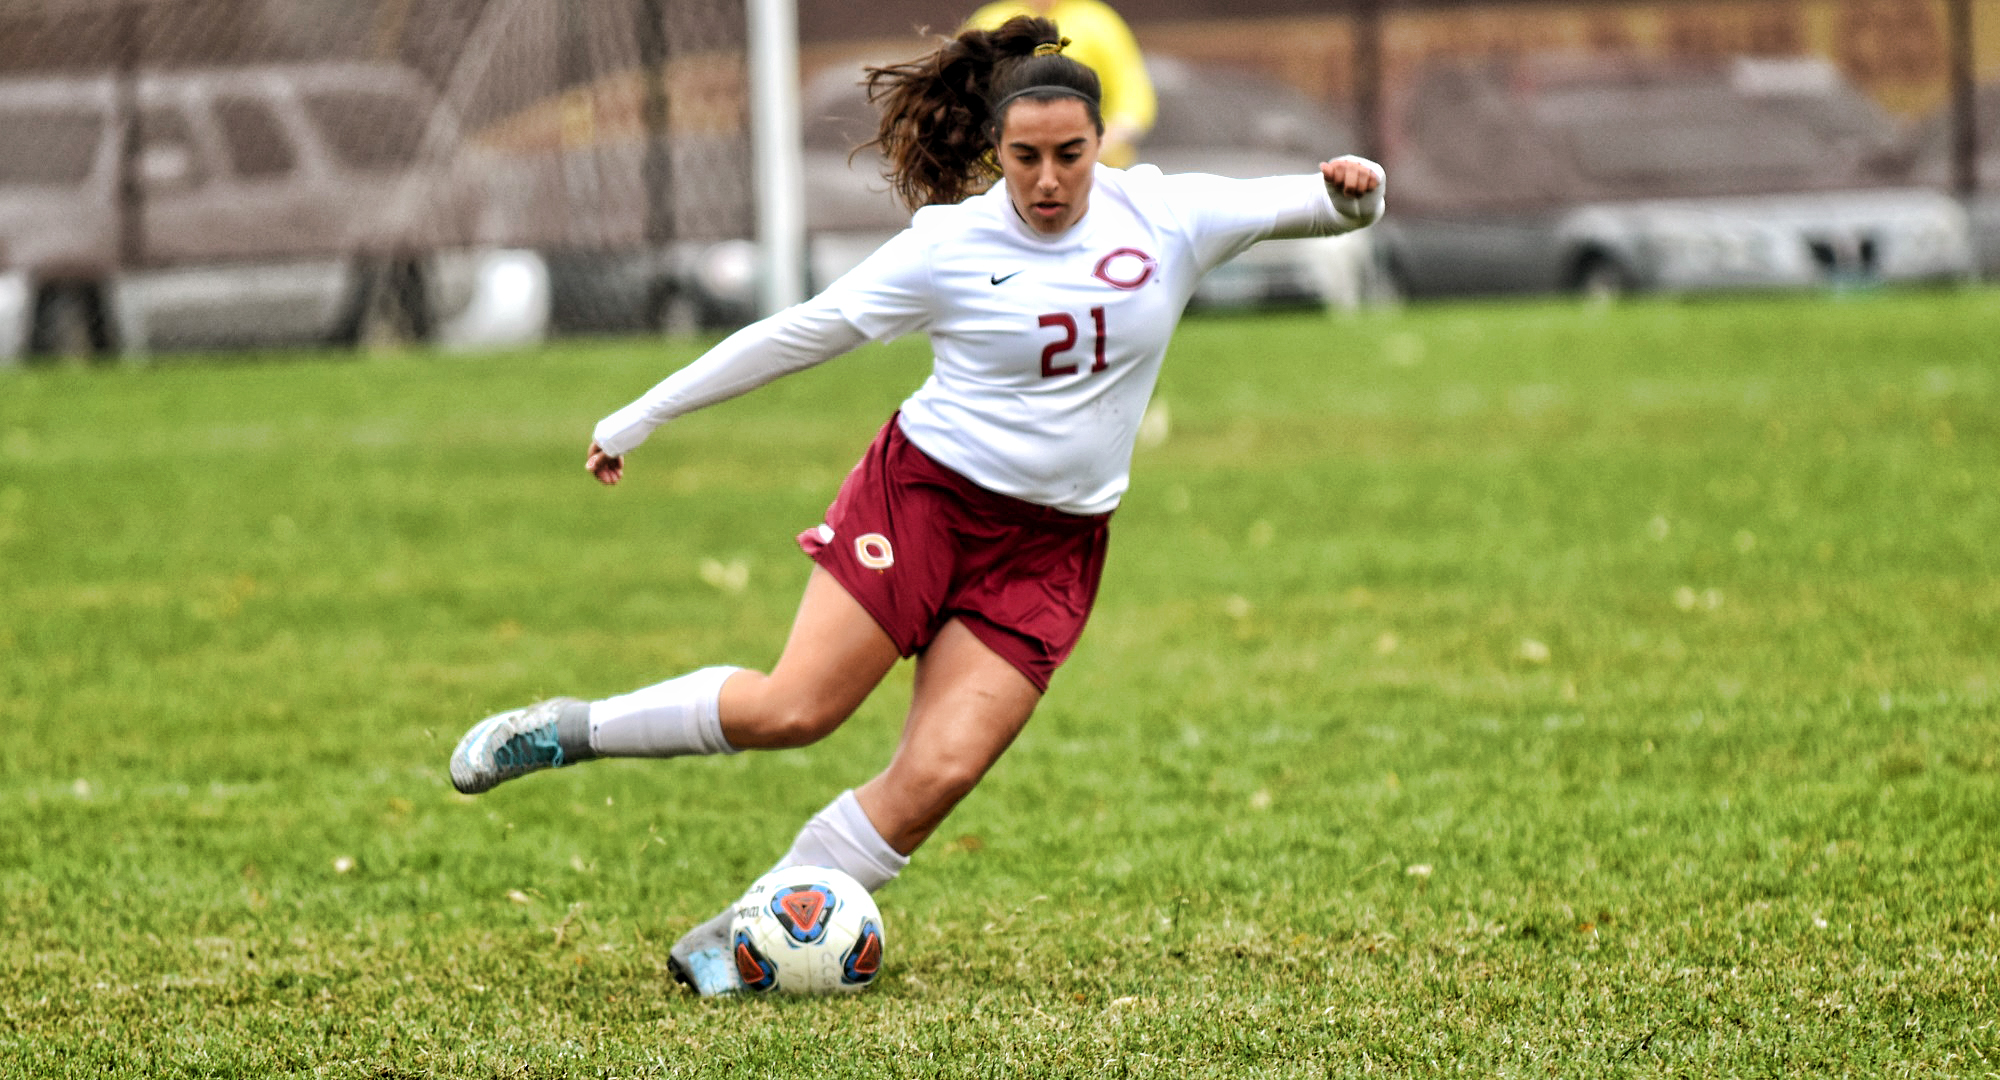 Sophomore Rachel Nemer scored the game-winning goal in the Cobbers' 3-1 win at Wis.-Superior. It was her second goal in the past four games.